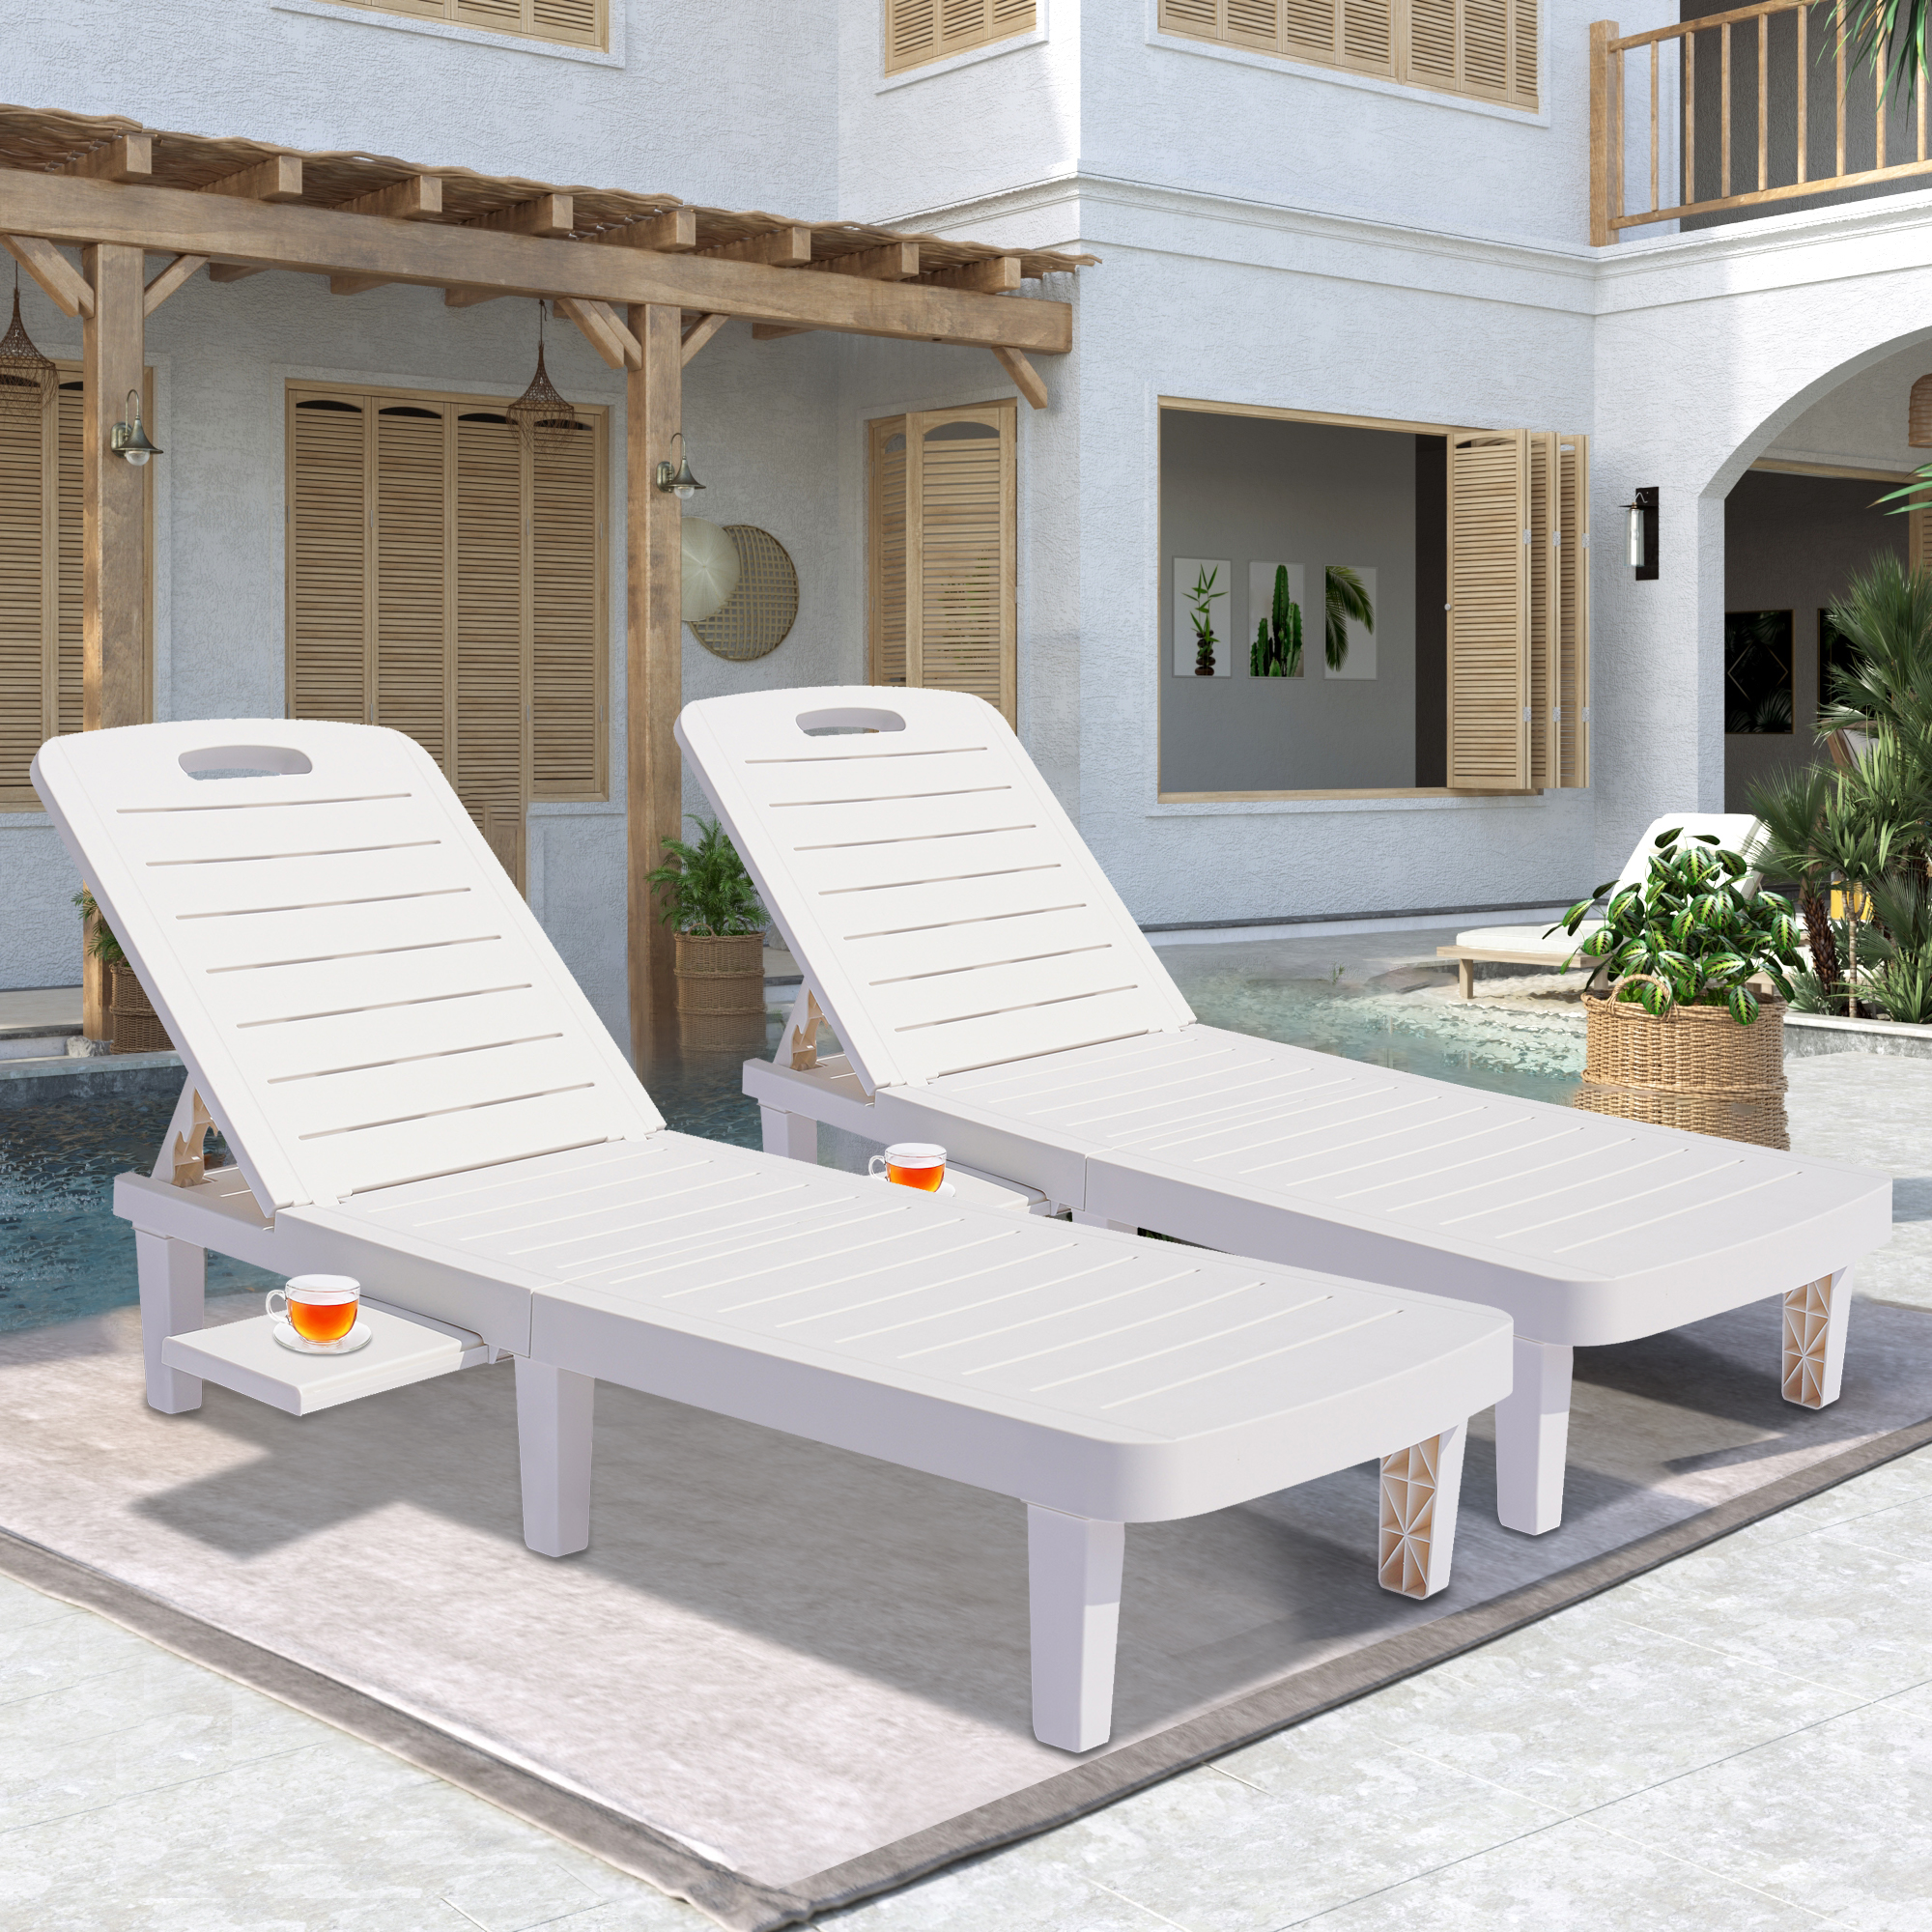 Patio Lounge Chair Set of 2, Adjustable Chaise with Side Table, Outdoor Lounger Recliner for Poolside, Patio, Backyard, Wood Texture Design | Waterproof | Easy to Assemble | Max Weight 330 lbs White - image 1 of 10